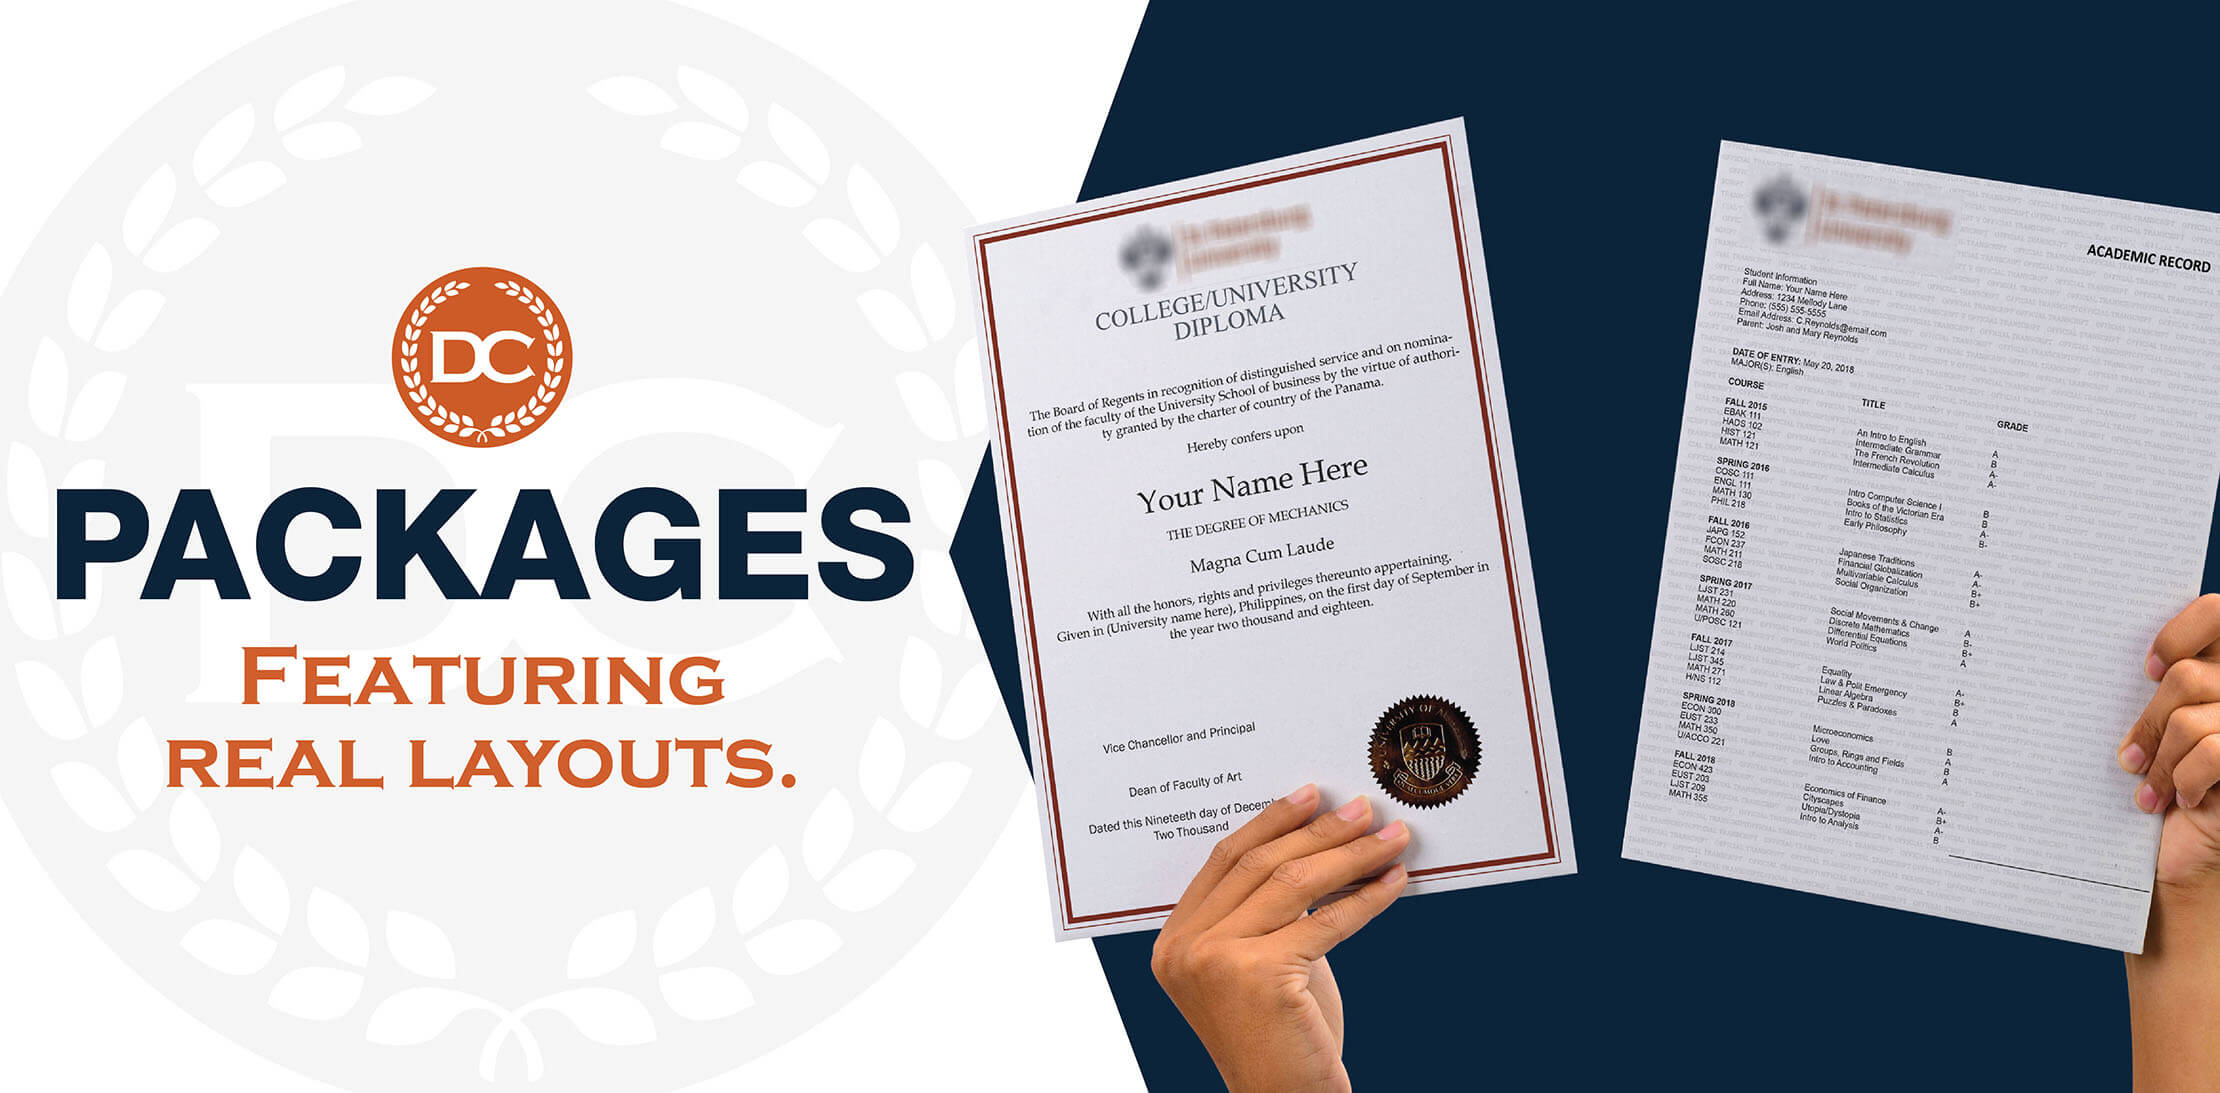 Buy fake diploma and transcript packages! Complete high school and college sets with 20% savings by bundling! Includes our guarantee and arrives fast! 
